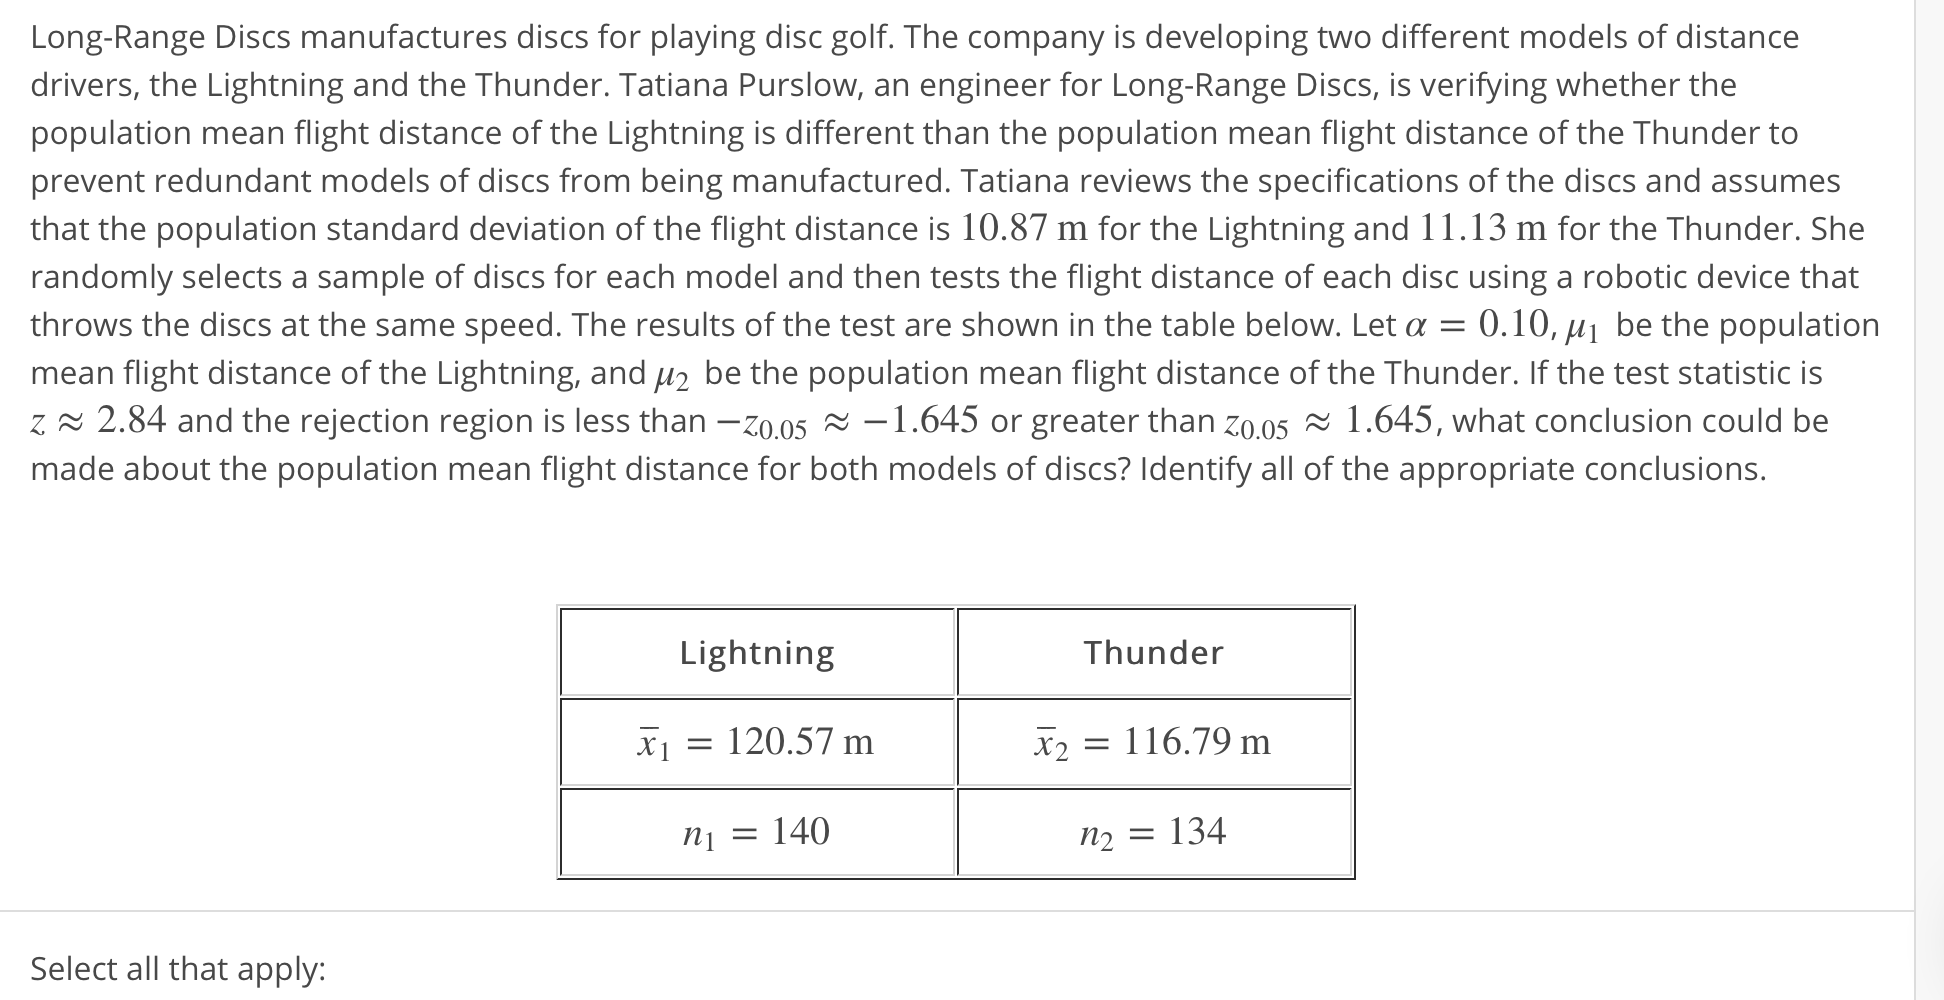 Long-Range Discs manufactures discs for playing disc golf. The company is developing two different models of distance
drivers, the Lightning and the Thunder. Tatiana Purslow, an engineer for Long-Range Discs, is verifying whether the
population mean flight distance of the Lightning is different than the population mean flight distance of the Thunder to
prevent redundant models of discs from being manufactured. Tatiana reviews the specifications of the discs and assumes
that the population standard deviation of the flight distance is 10.87 m for the Lightning and 11.13 m for the Thunder. She
randomly selects a sample of discs for each model and then tests the flight distance of each disc using a robotic device that
throws the discs at the same speed. The results of the test are shown in the table below. Let α = 0.10, be the population
mean flight distance of the Lightning, and H2 be the population mean flight distance of the Thunder. If the test statistic is
zR 2.84 and the rejection region is less than -z0o 1.645 or greater than zo.0s 1.645, what conclusion could be
made about the population mean flight distance for both models of discs? Identify all of the appropriate conclusions.
Lightning
-,-120.57 m
1140
Thunder
X2 = 1 16.79 m
n-= 134
Select all that apply:
